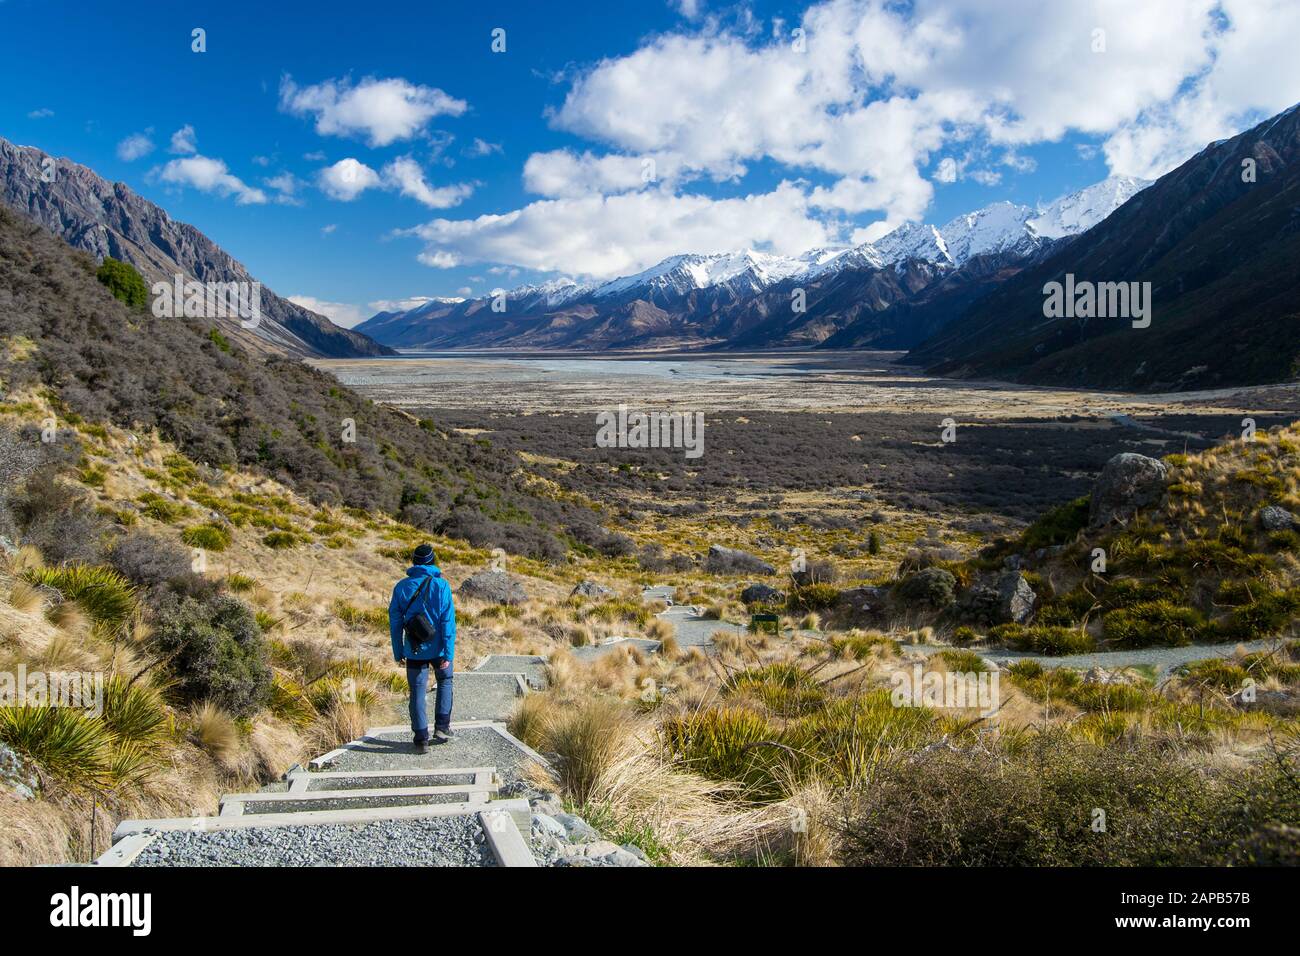 Wiew from Tasman Glacier walk with blue person in Mount Cook National Park, Aoraki, South Island, New Zealand Stock Photo